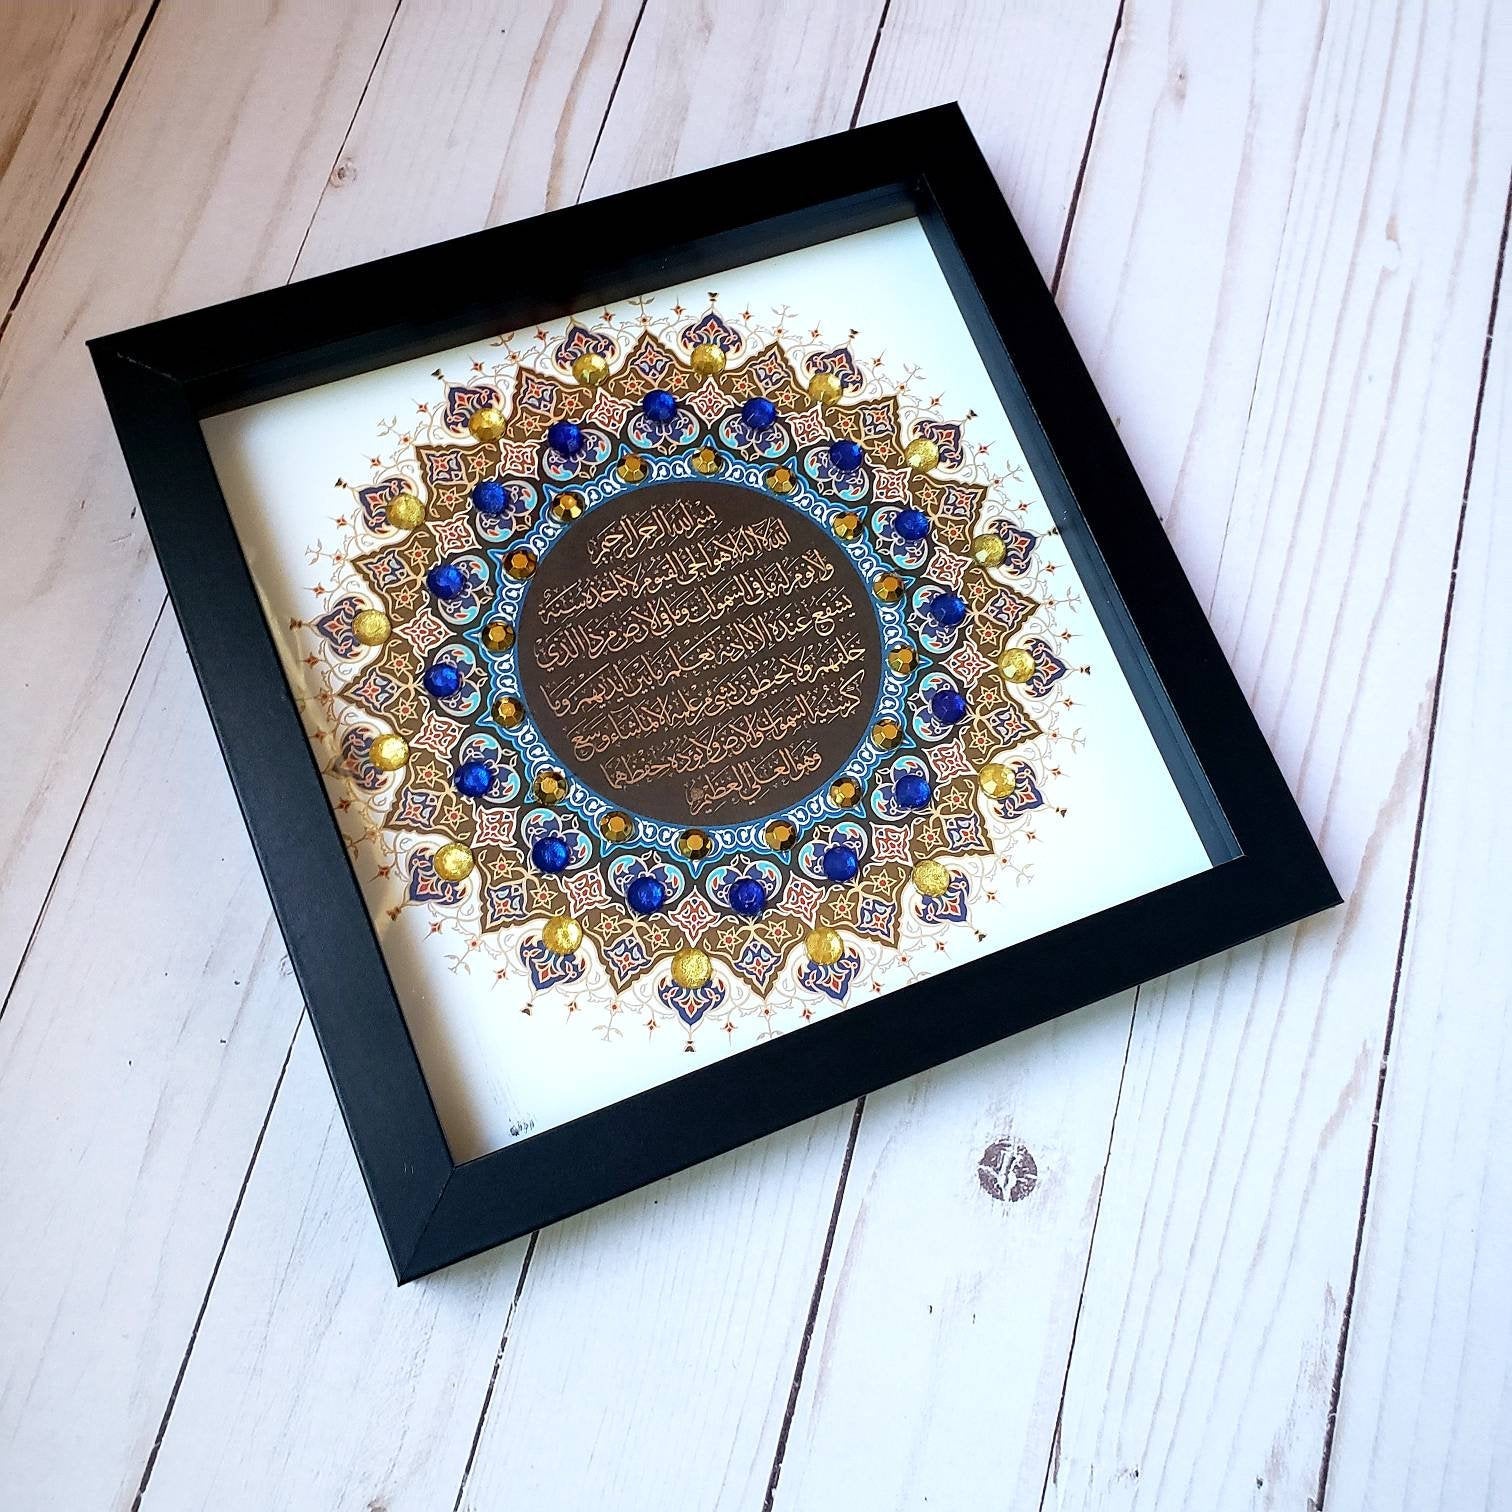 Surah Al Fatiha  Islamic Art in a black shadowbox frame, ready to hang Modern Islamic Wall Art with blue and gold beads and stones.